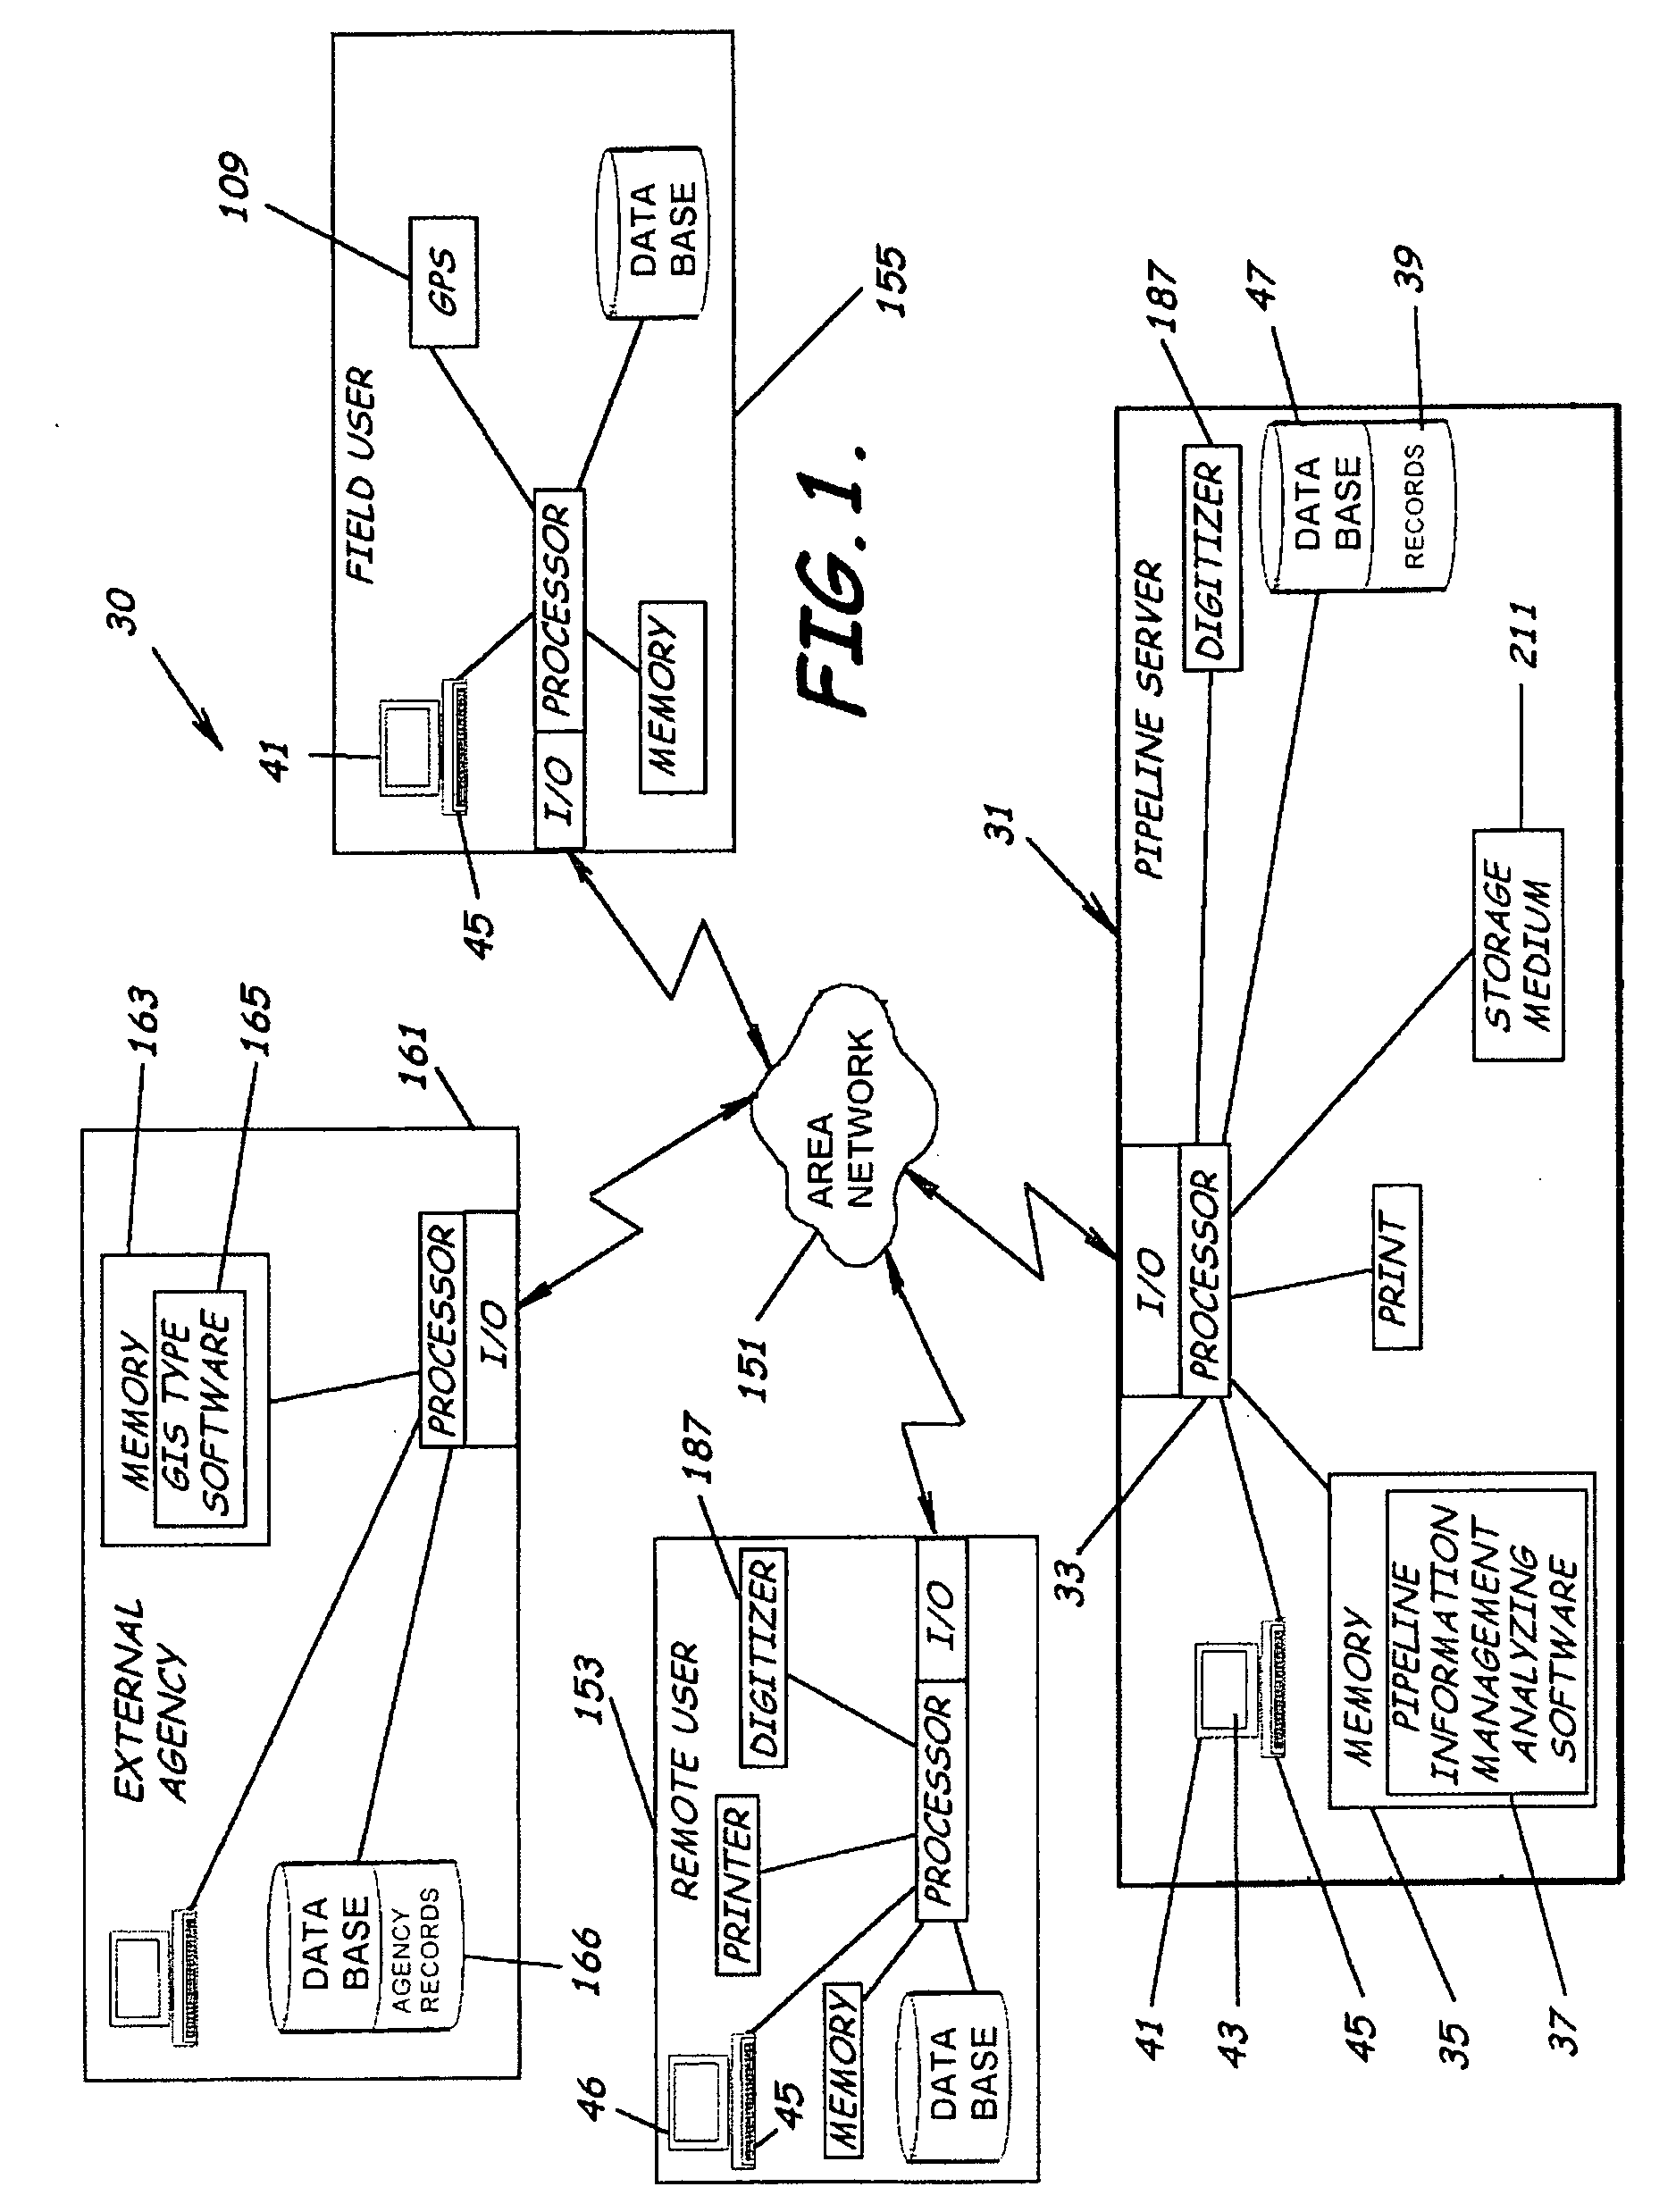 System to facilitate pipeline management, software, and related methods